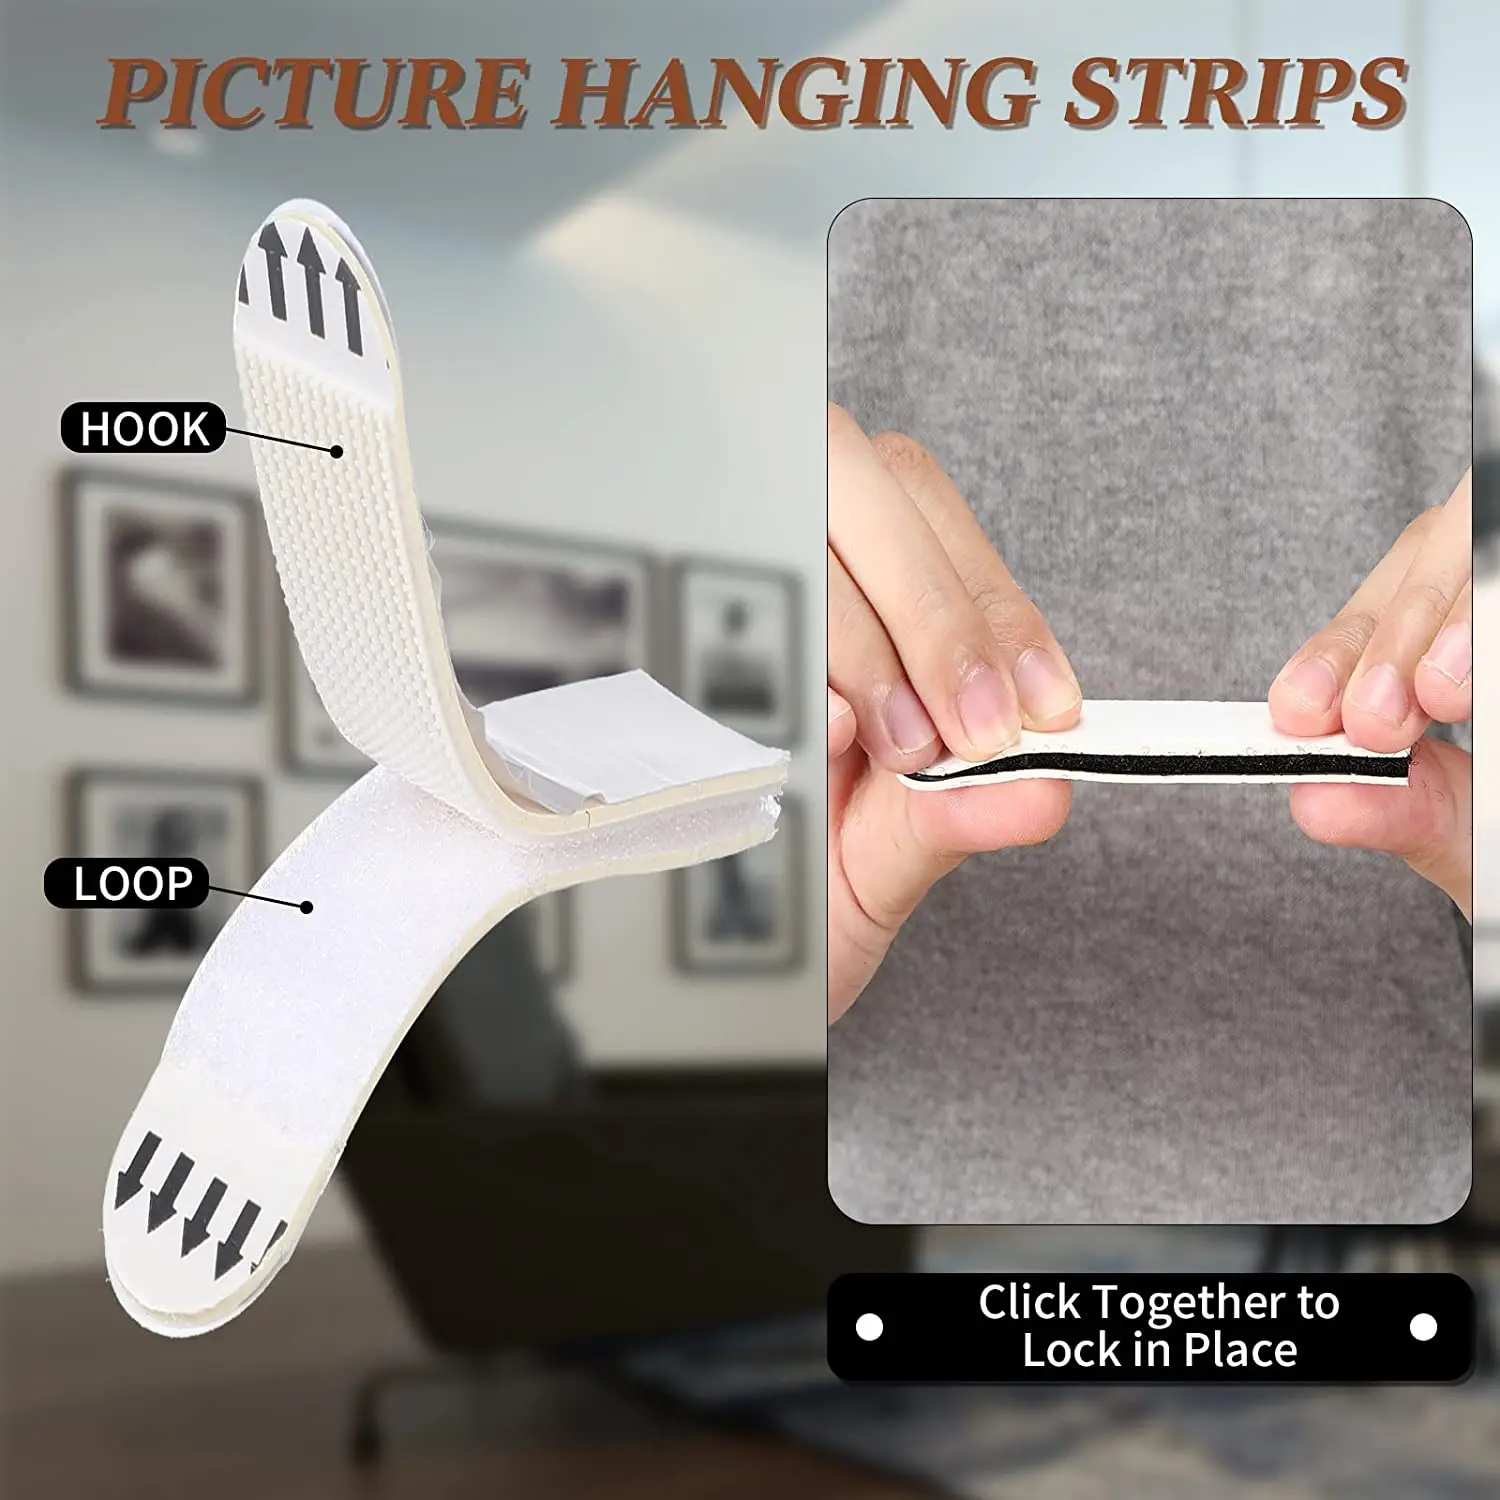 24 group S L White Tape Damage-Free Picture&Frame Hanging Strips Wall  Sticker Hook Value Pack Picture Hanging Strips